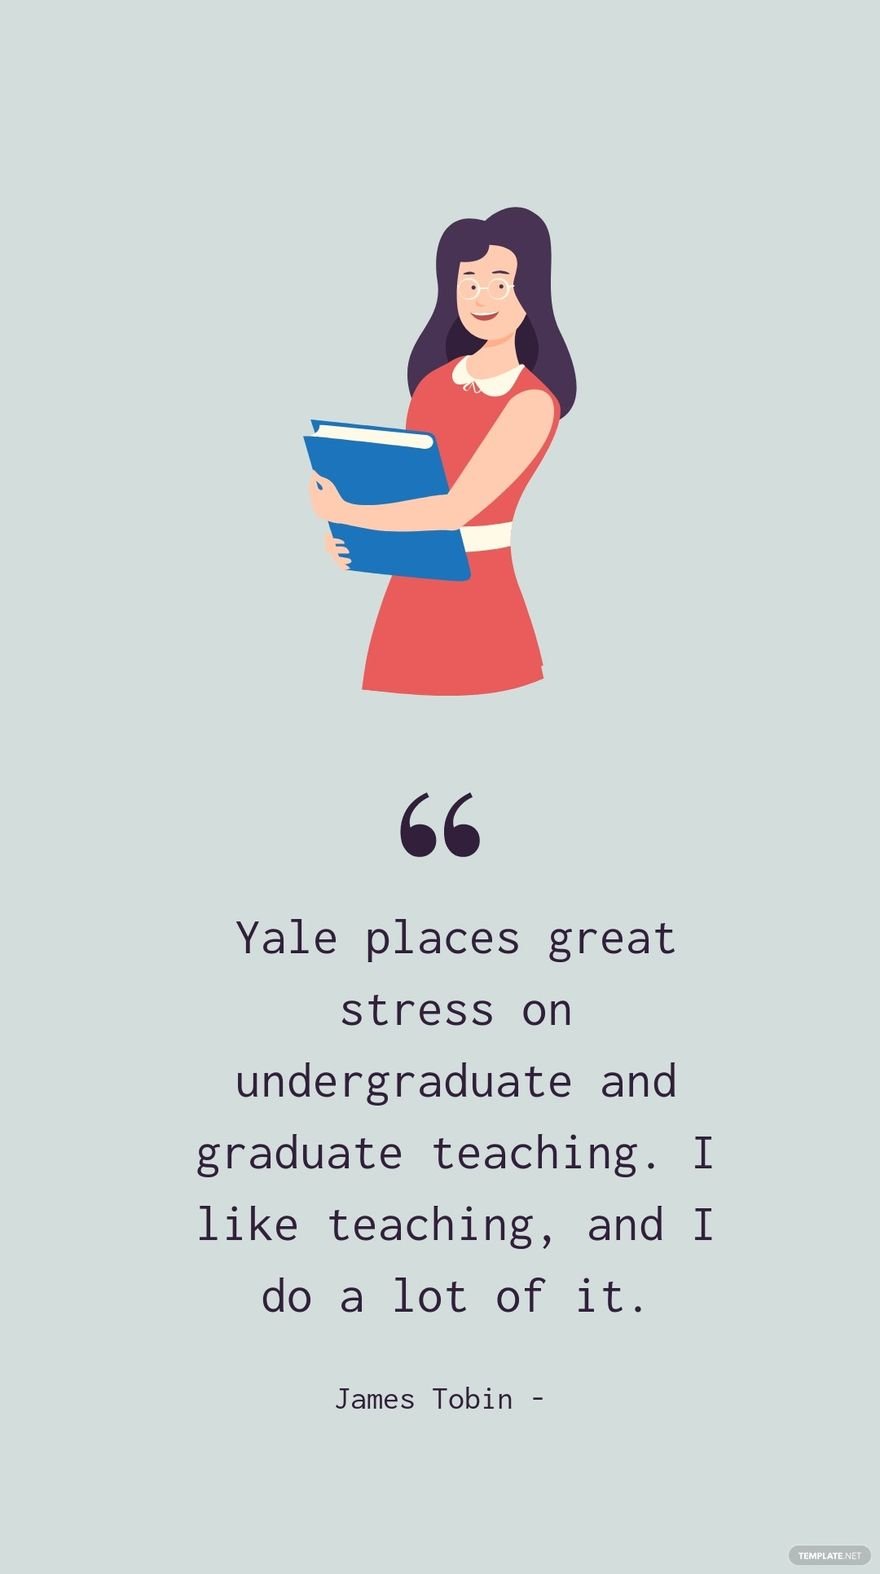 James Tobin - Yale places great stress on undergraduate and graduate teaching. I like teaching, and I do a lot of it.